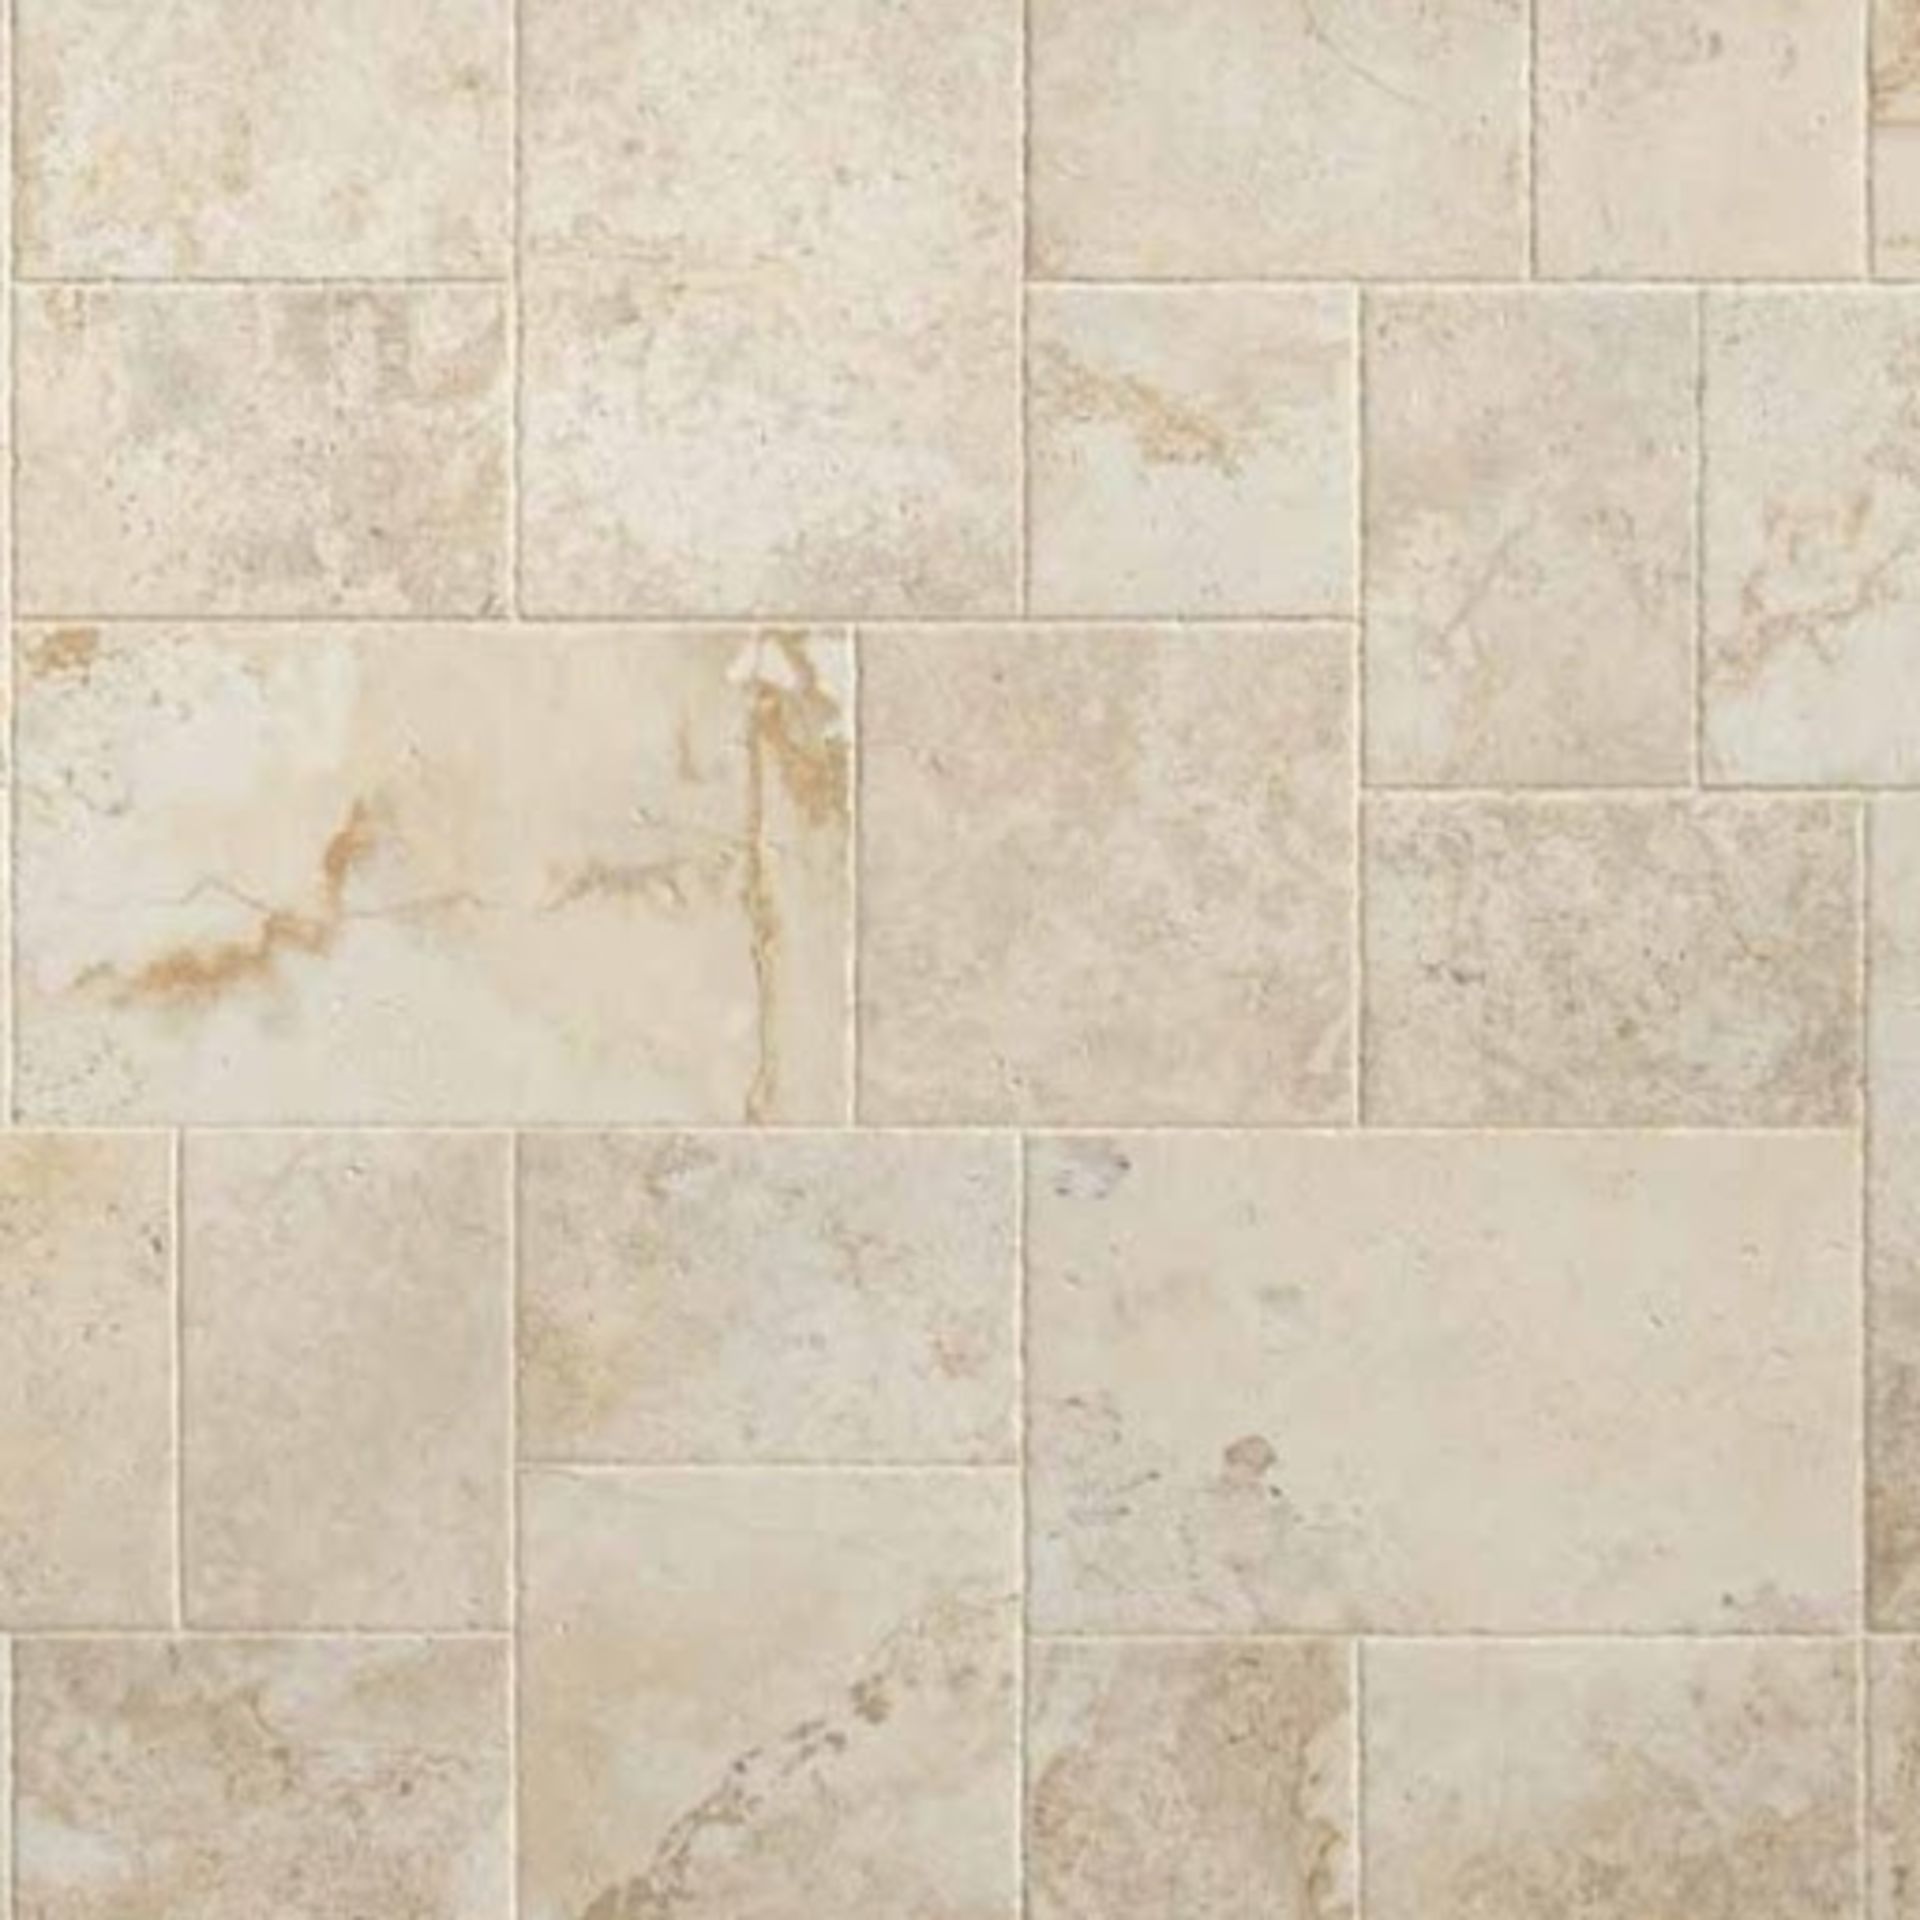 NEW 8.76 Square Meters of Imola Beige Wall and Floor Tiles. 605x605mm per tile, 10mm thick. T... - Image 2 of 4